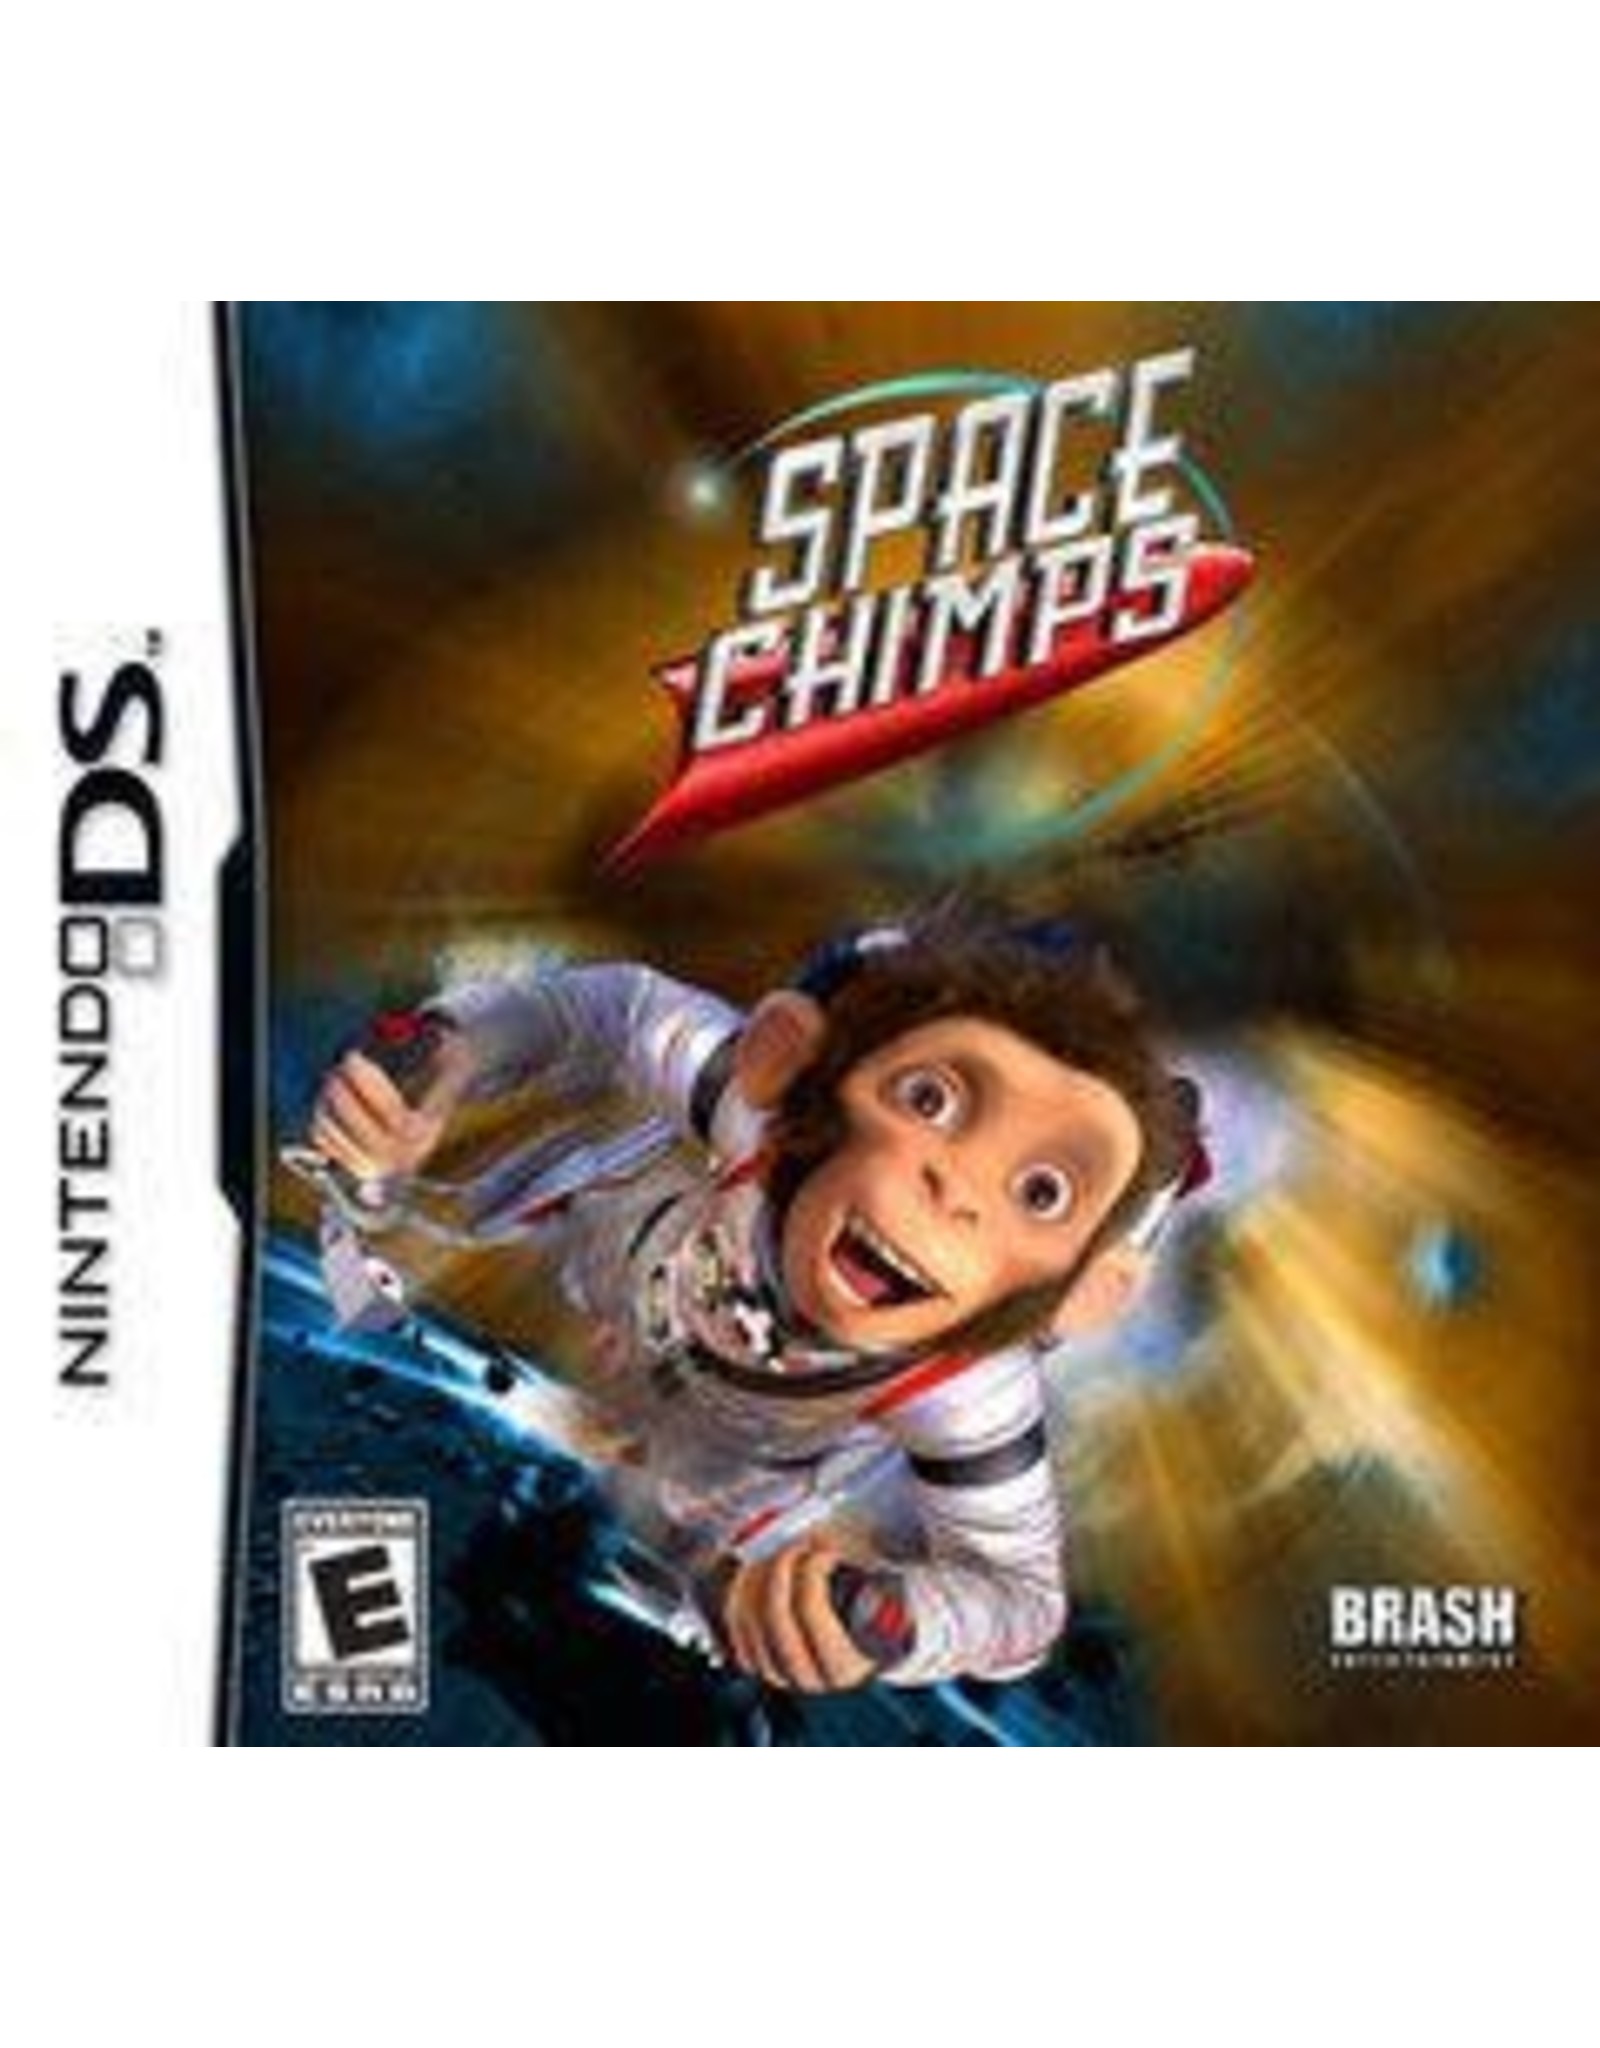 Nintendo DS Space Chimps (Cart Only)